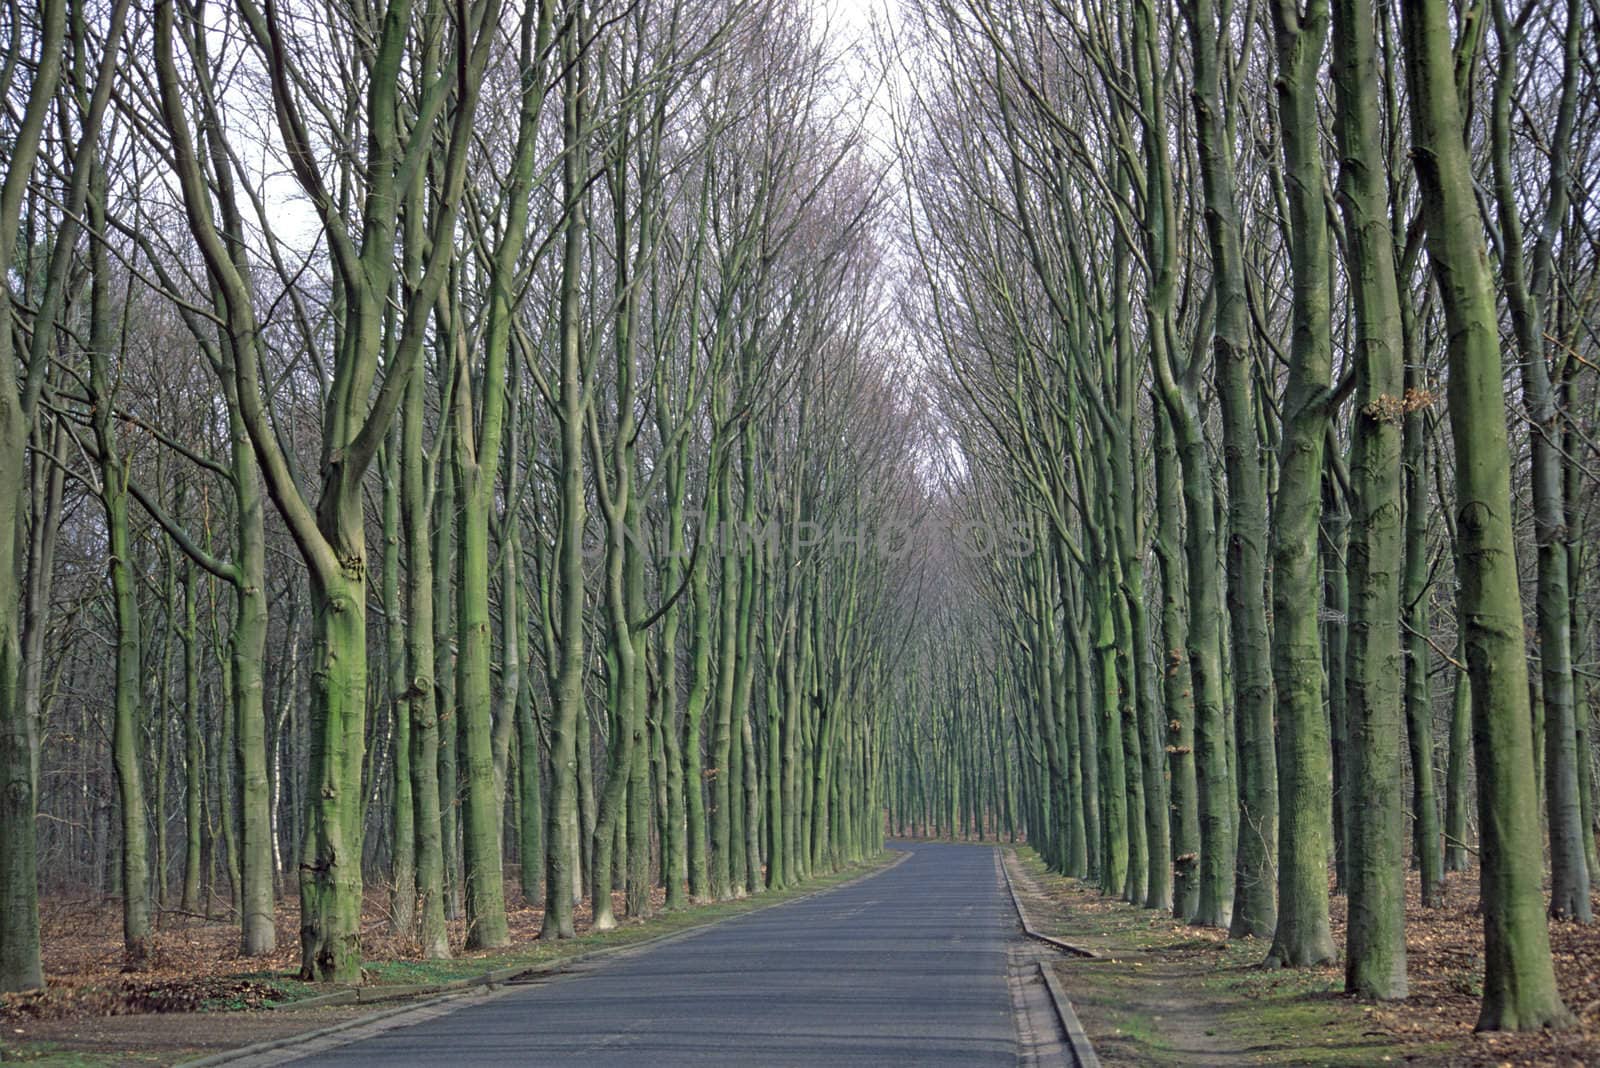 A quiet road through a forest in the Netherlands.